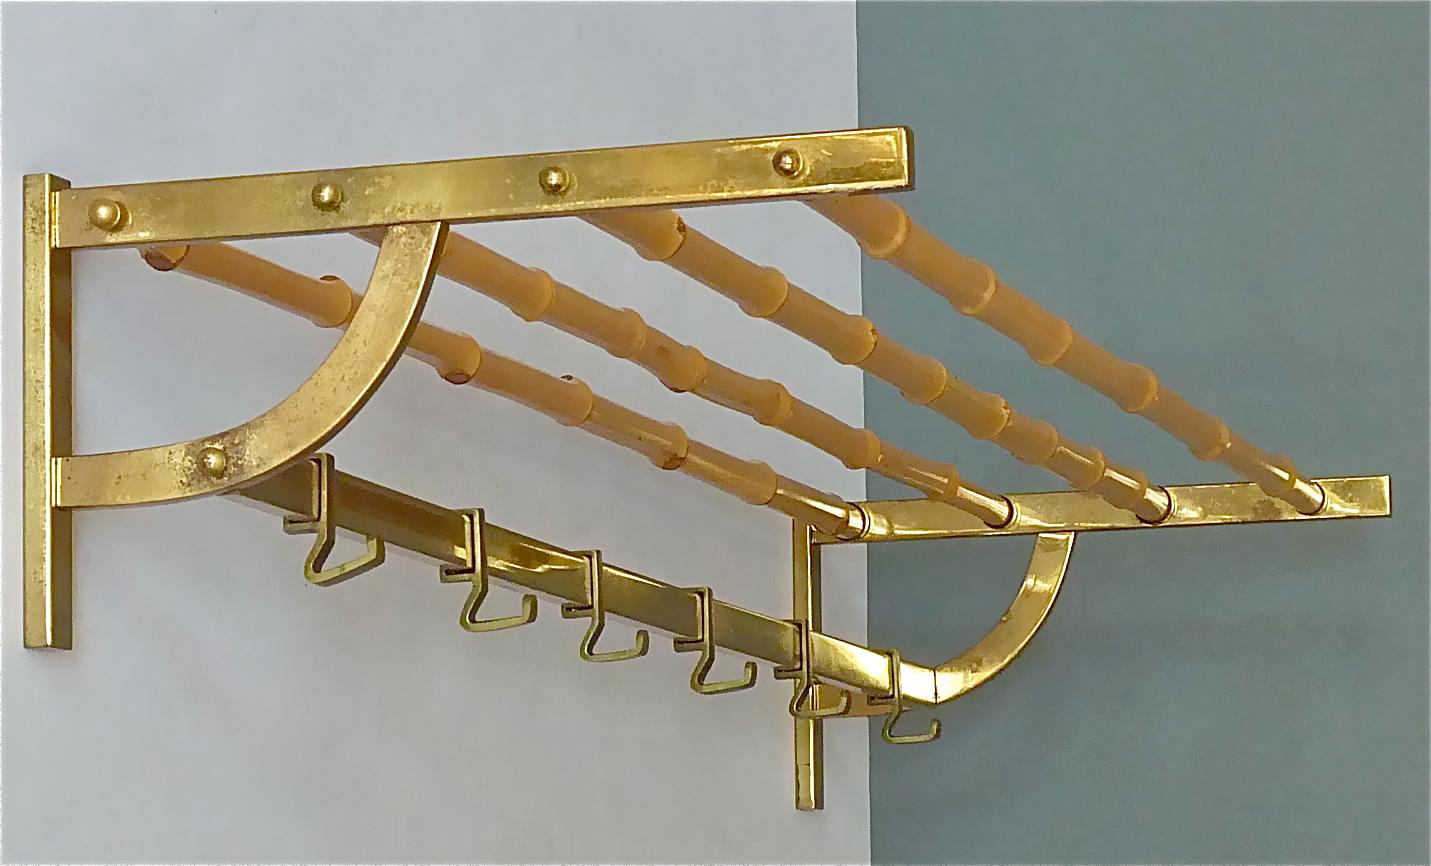 Extra large stunning and exceptional modernist coat rack or wall wardrobe, which has been designed and executed in the 1950s in Austria, probably it belongs to one of the wonderful designs by Auböck, Hagenauer, Josef Frank for Haus & Garten or